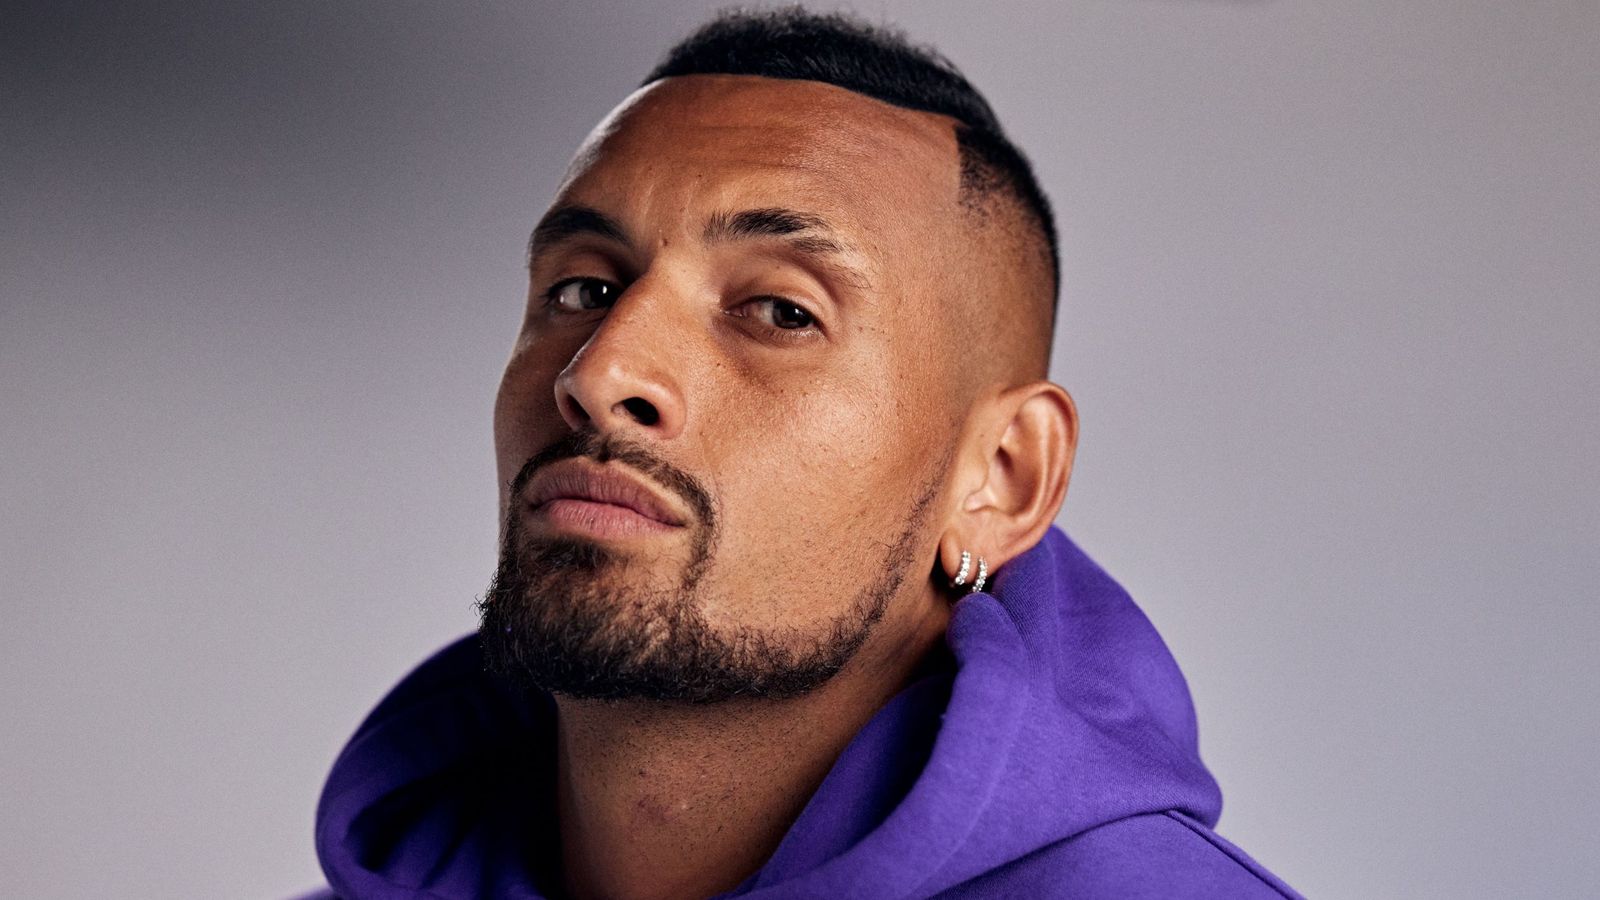 Nick Kyrgios stars in Netflix’s tennis documentary Break Point, which airs on Friday | Tennis News